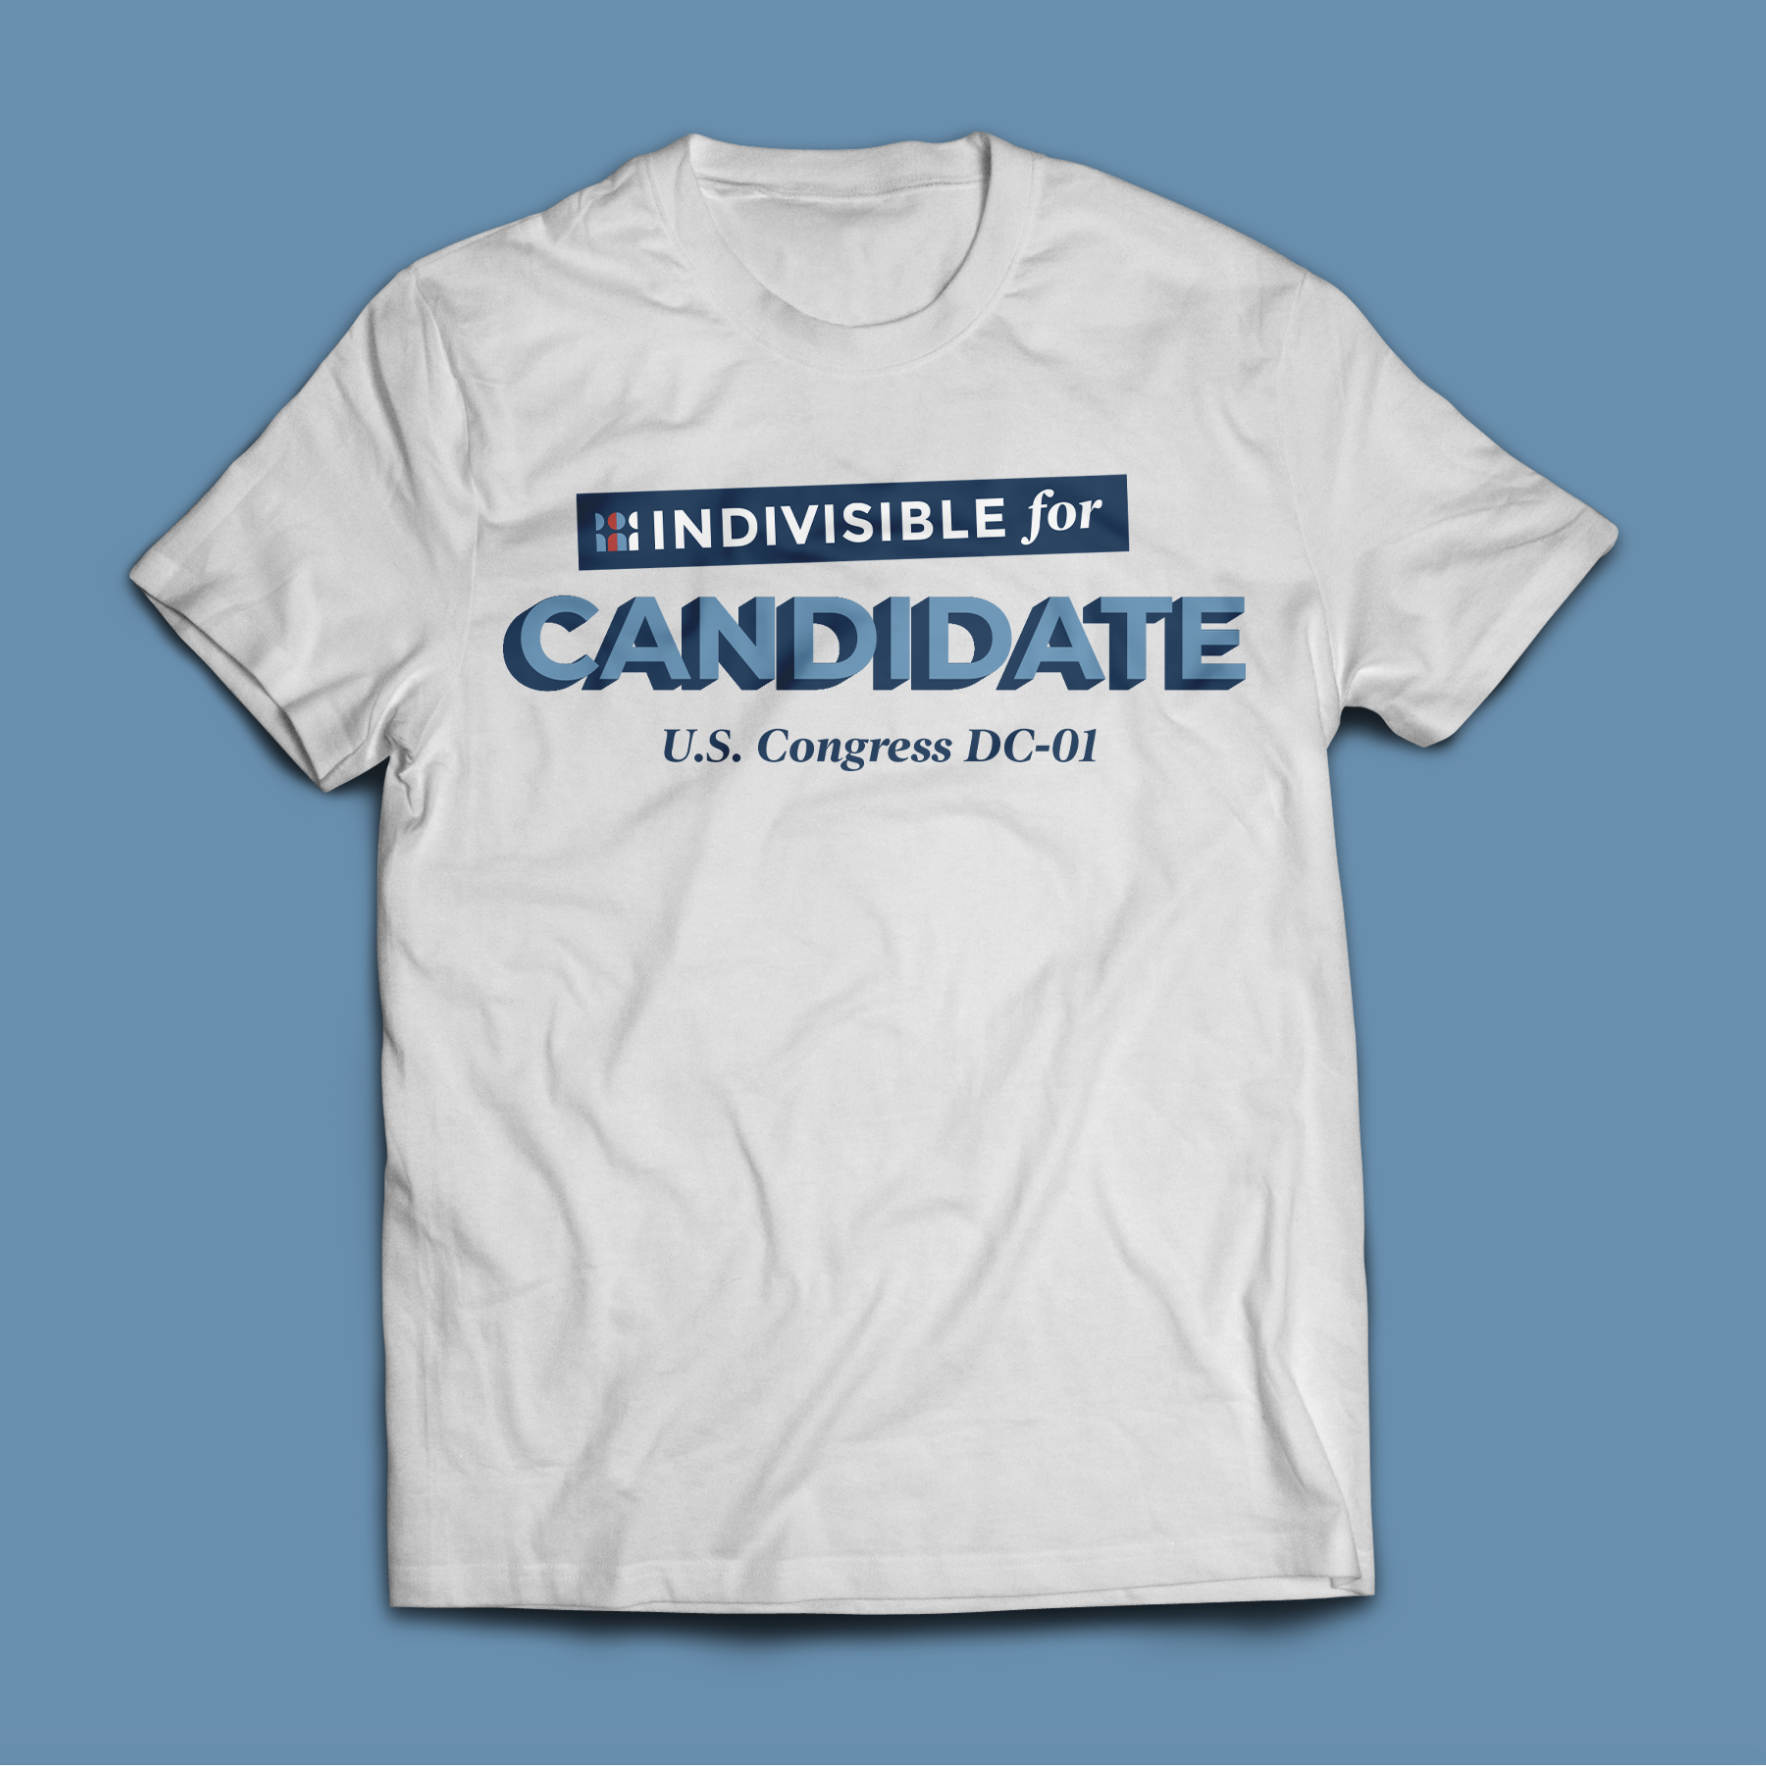 Endorsed Candidate T-Shirt